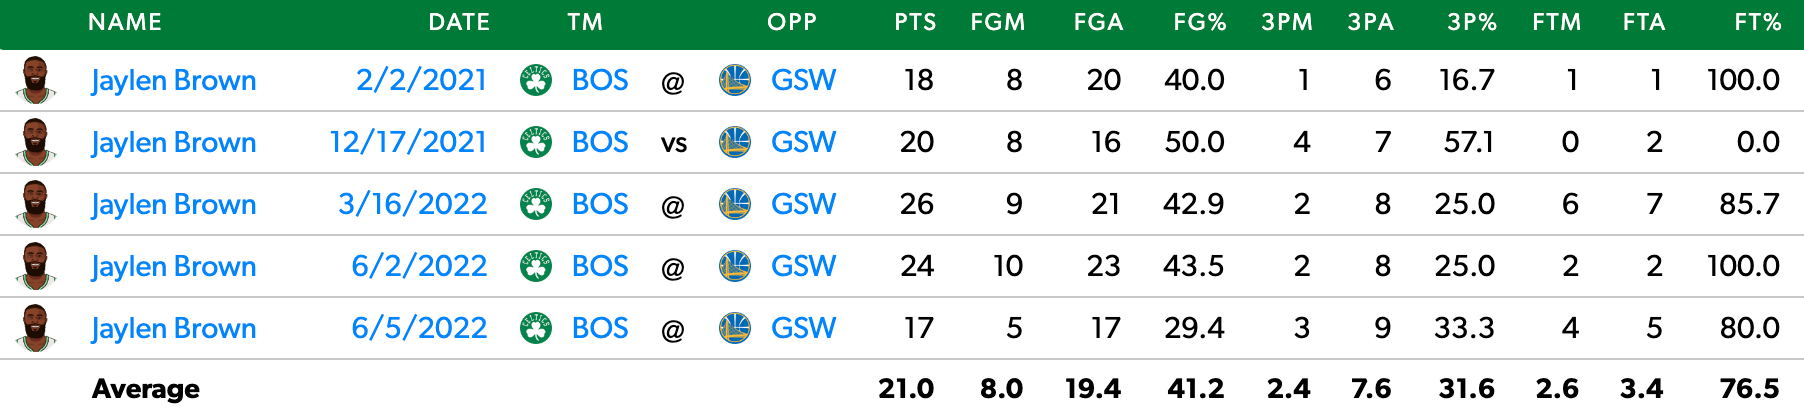 Brown's Game Log vs. Golden State over the last two seasons.